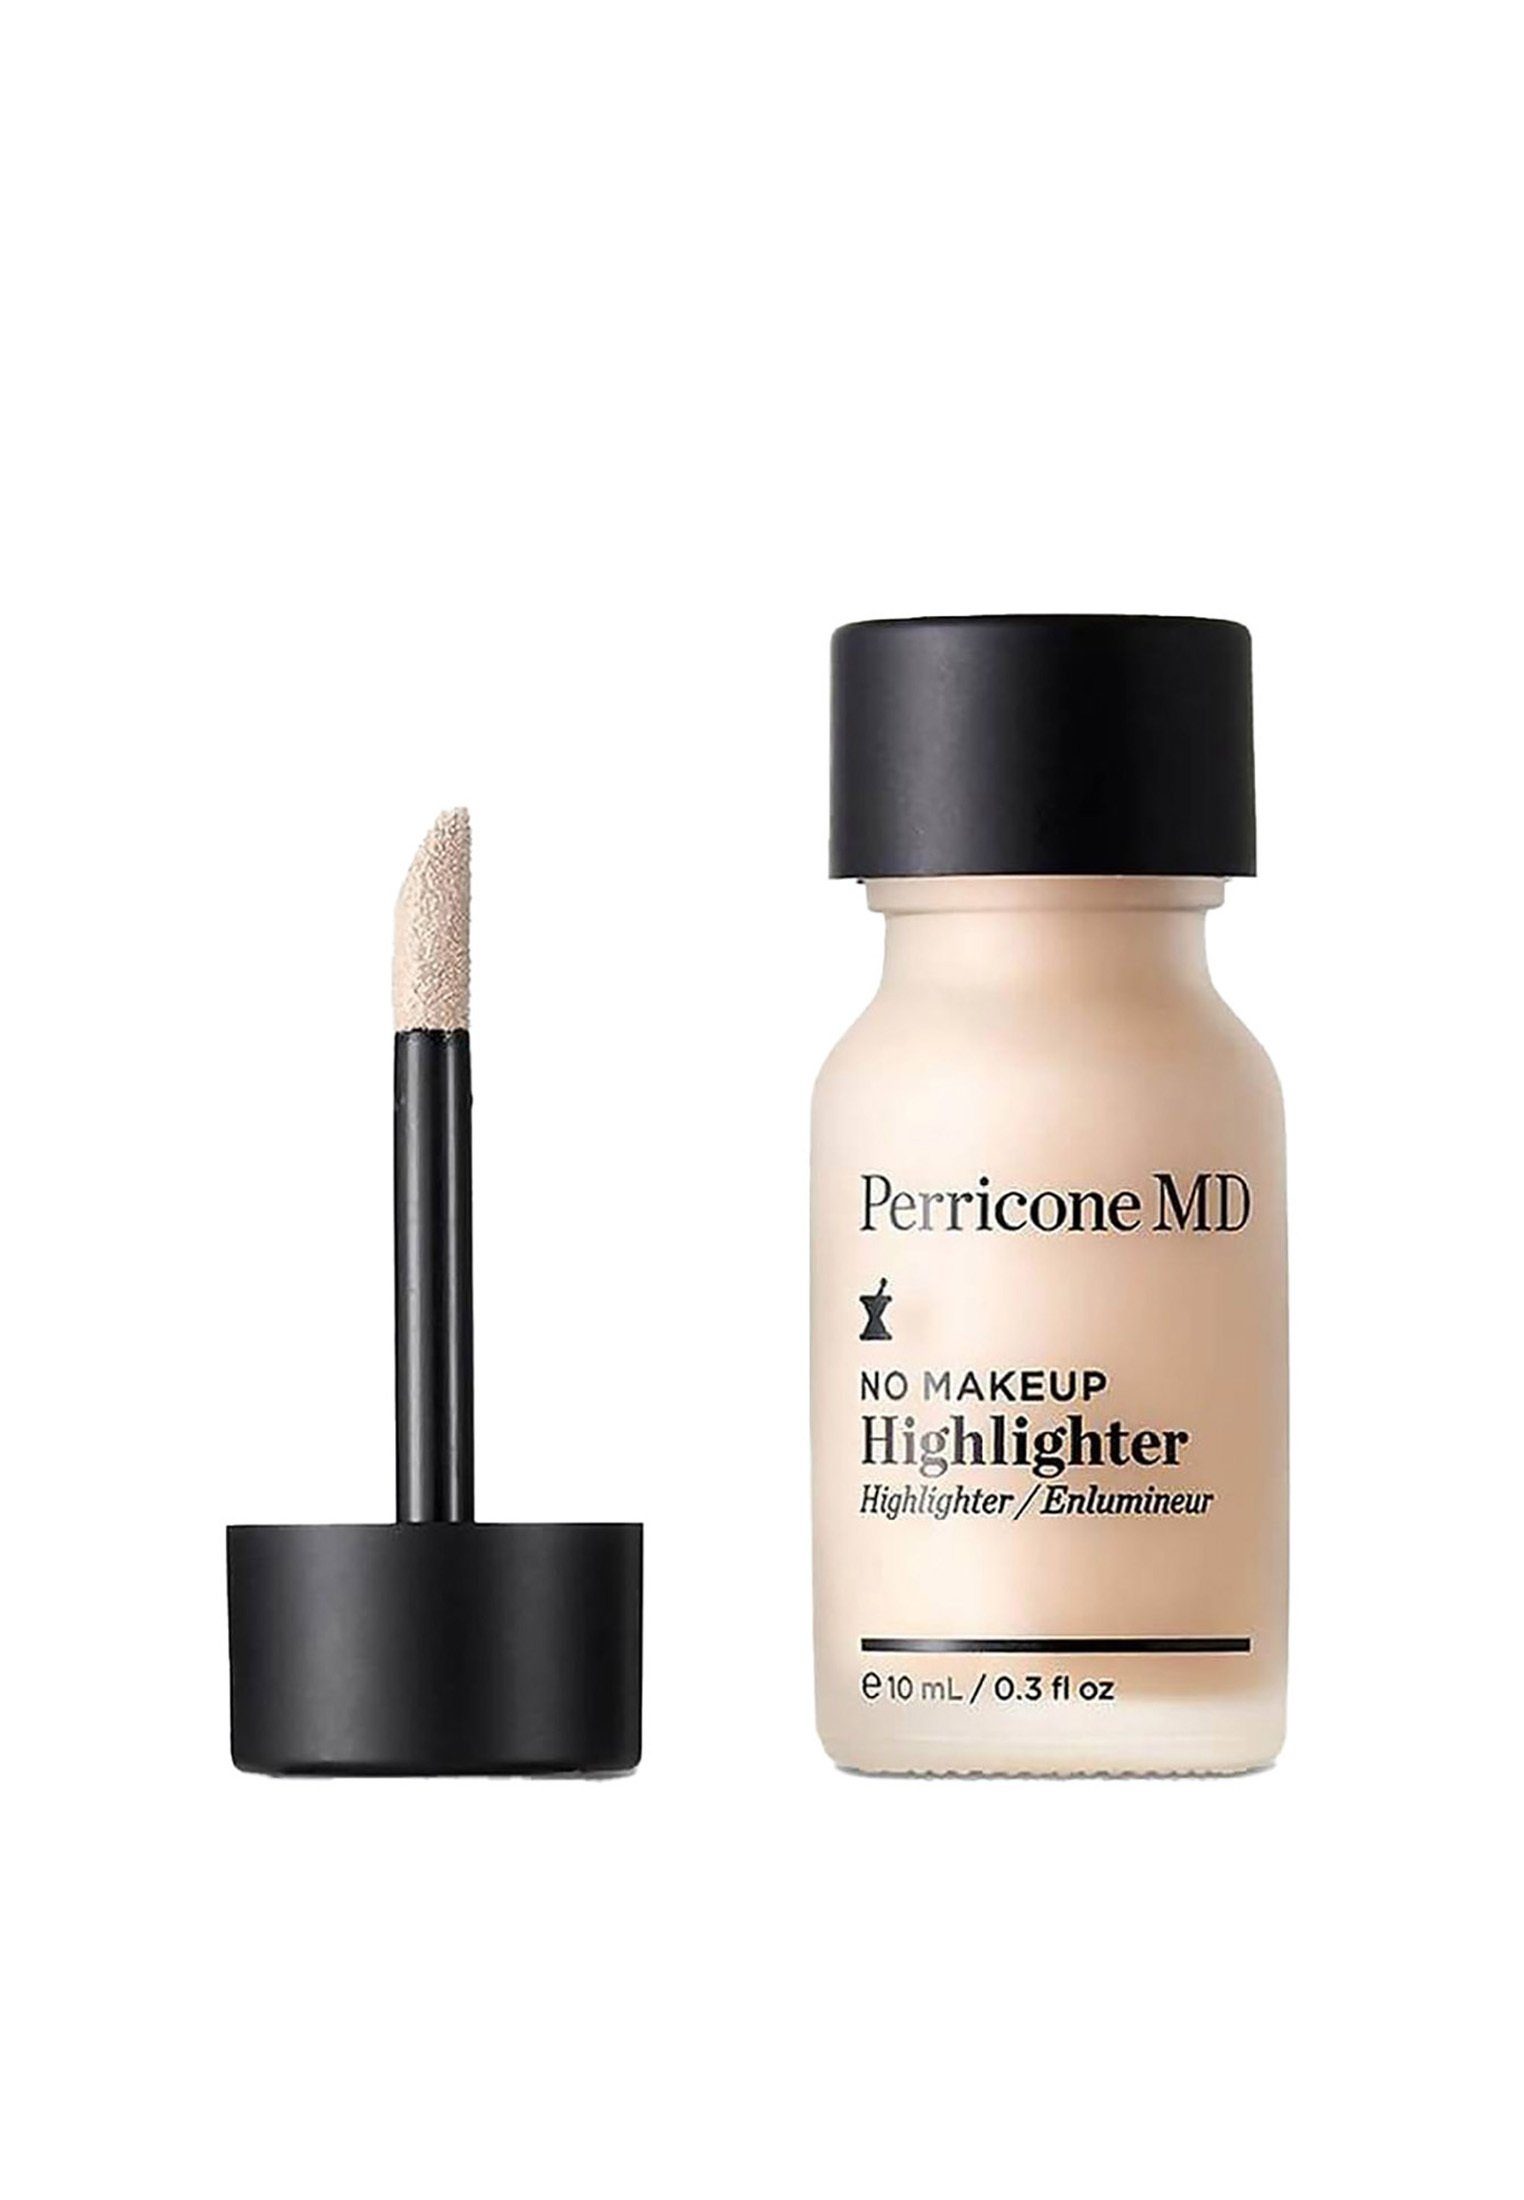 PERRICONE Highlighter Highlighter No Makeup Highlighter PERRICONE